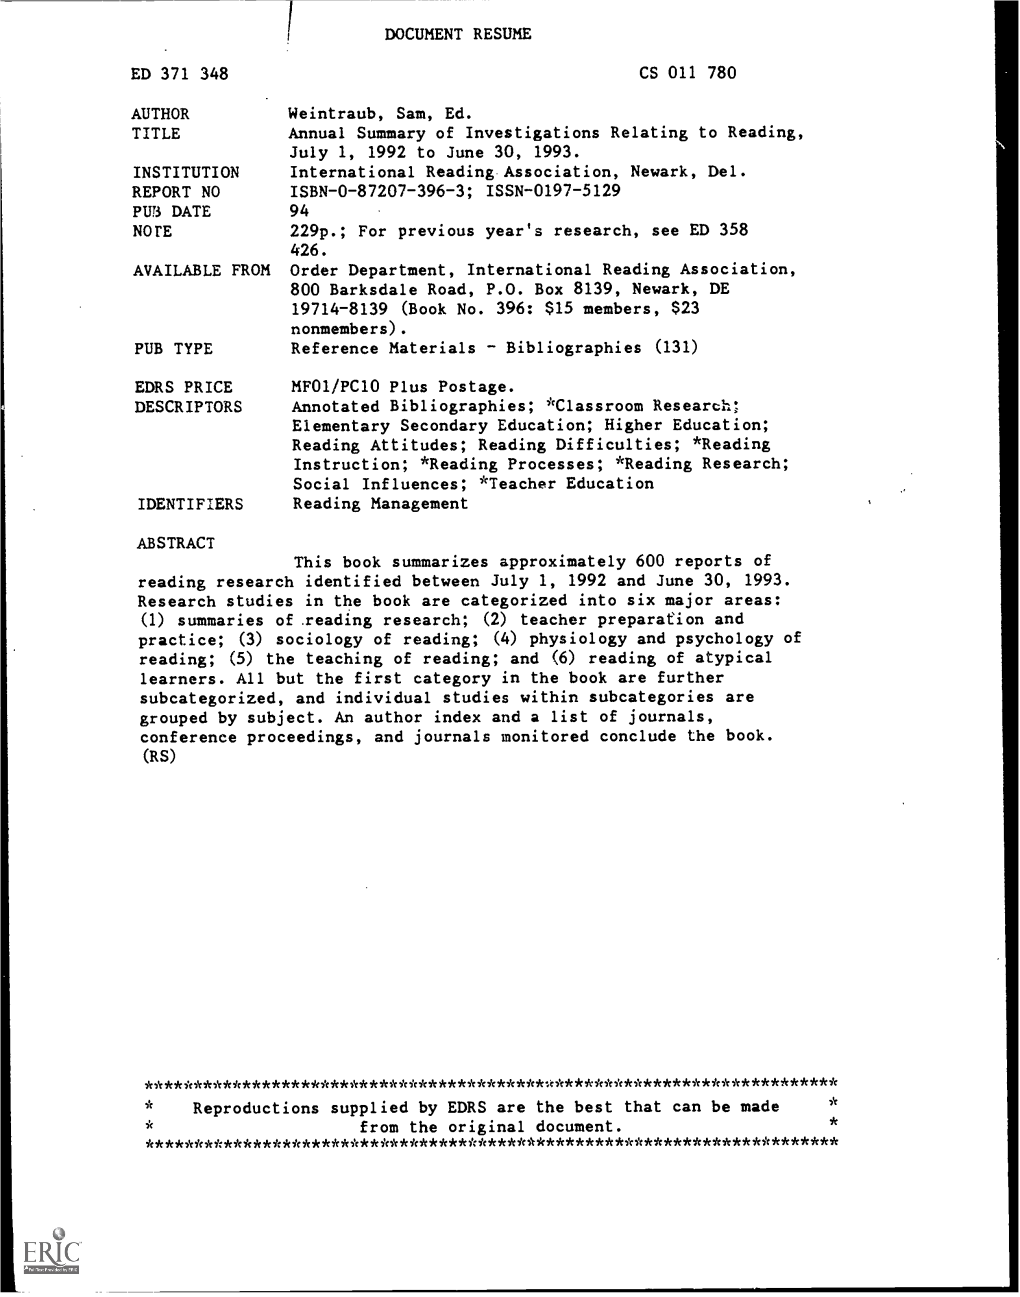 Annual Summary of Investigations Relating to Reading, July 1, 1992 to June 30, 1993